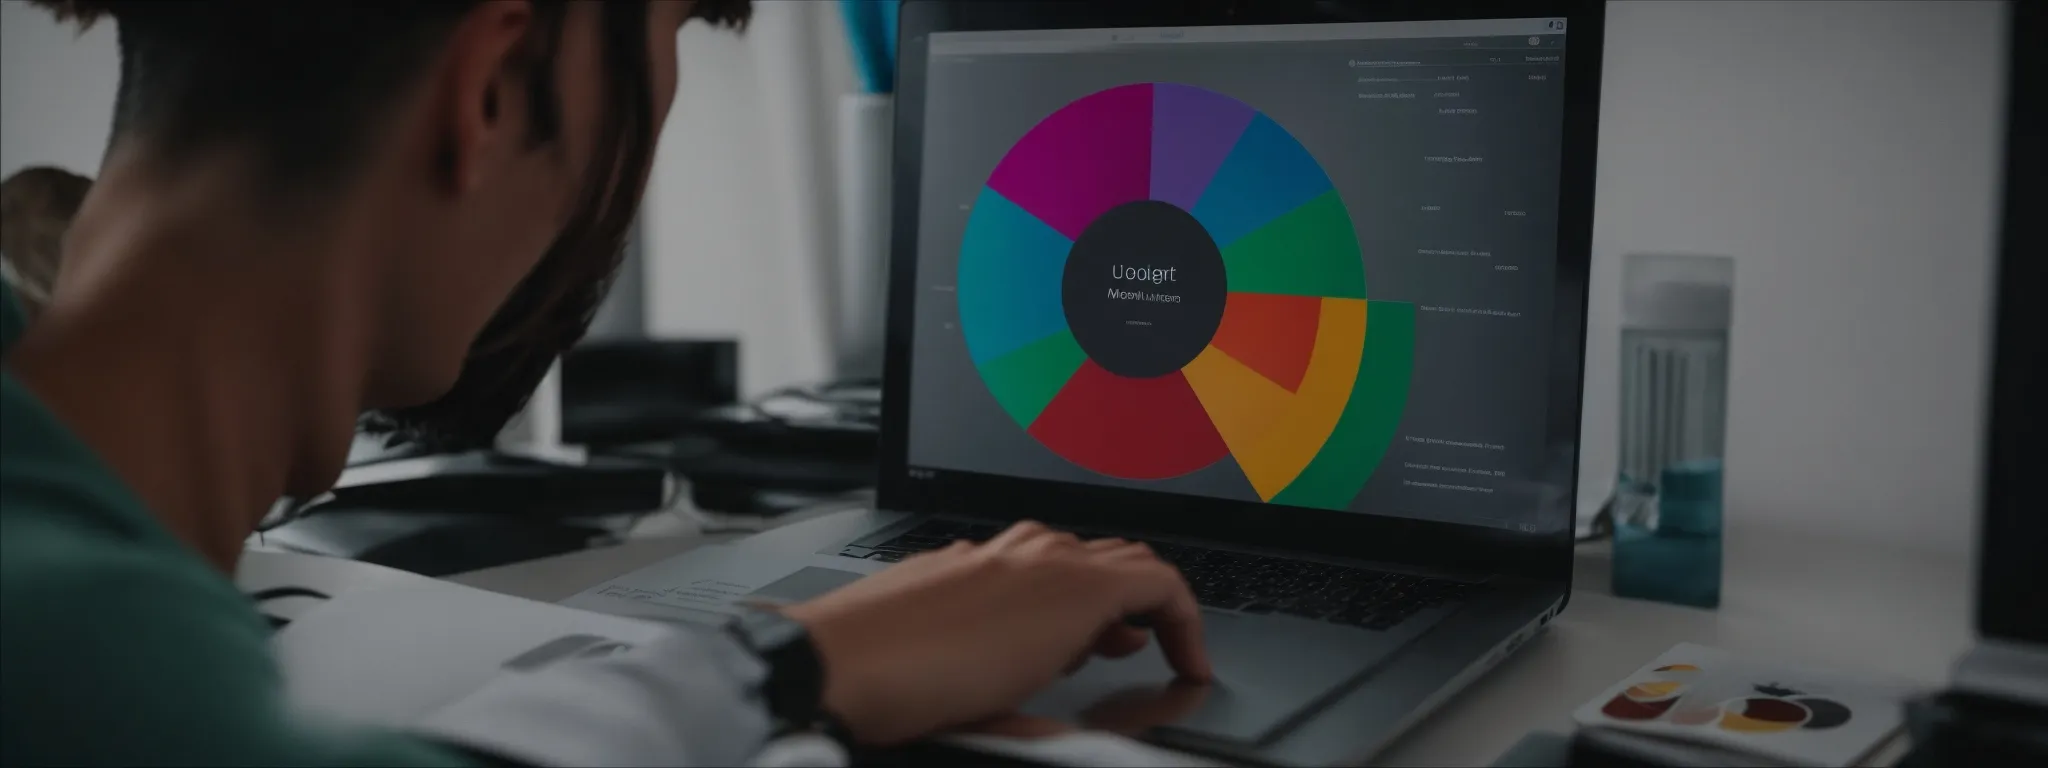 a marketer analyzing a colorful pie chart representing different budget allocations on a computer screen.